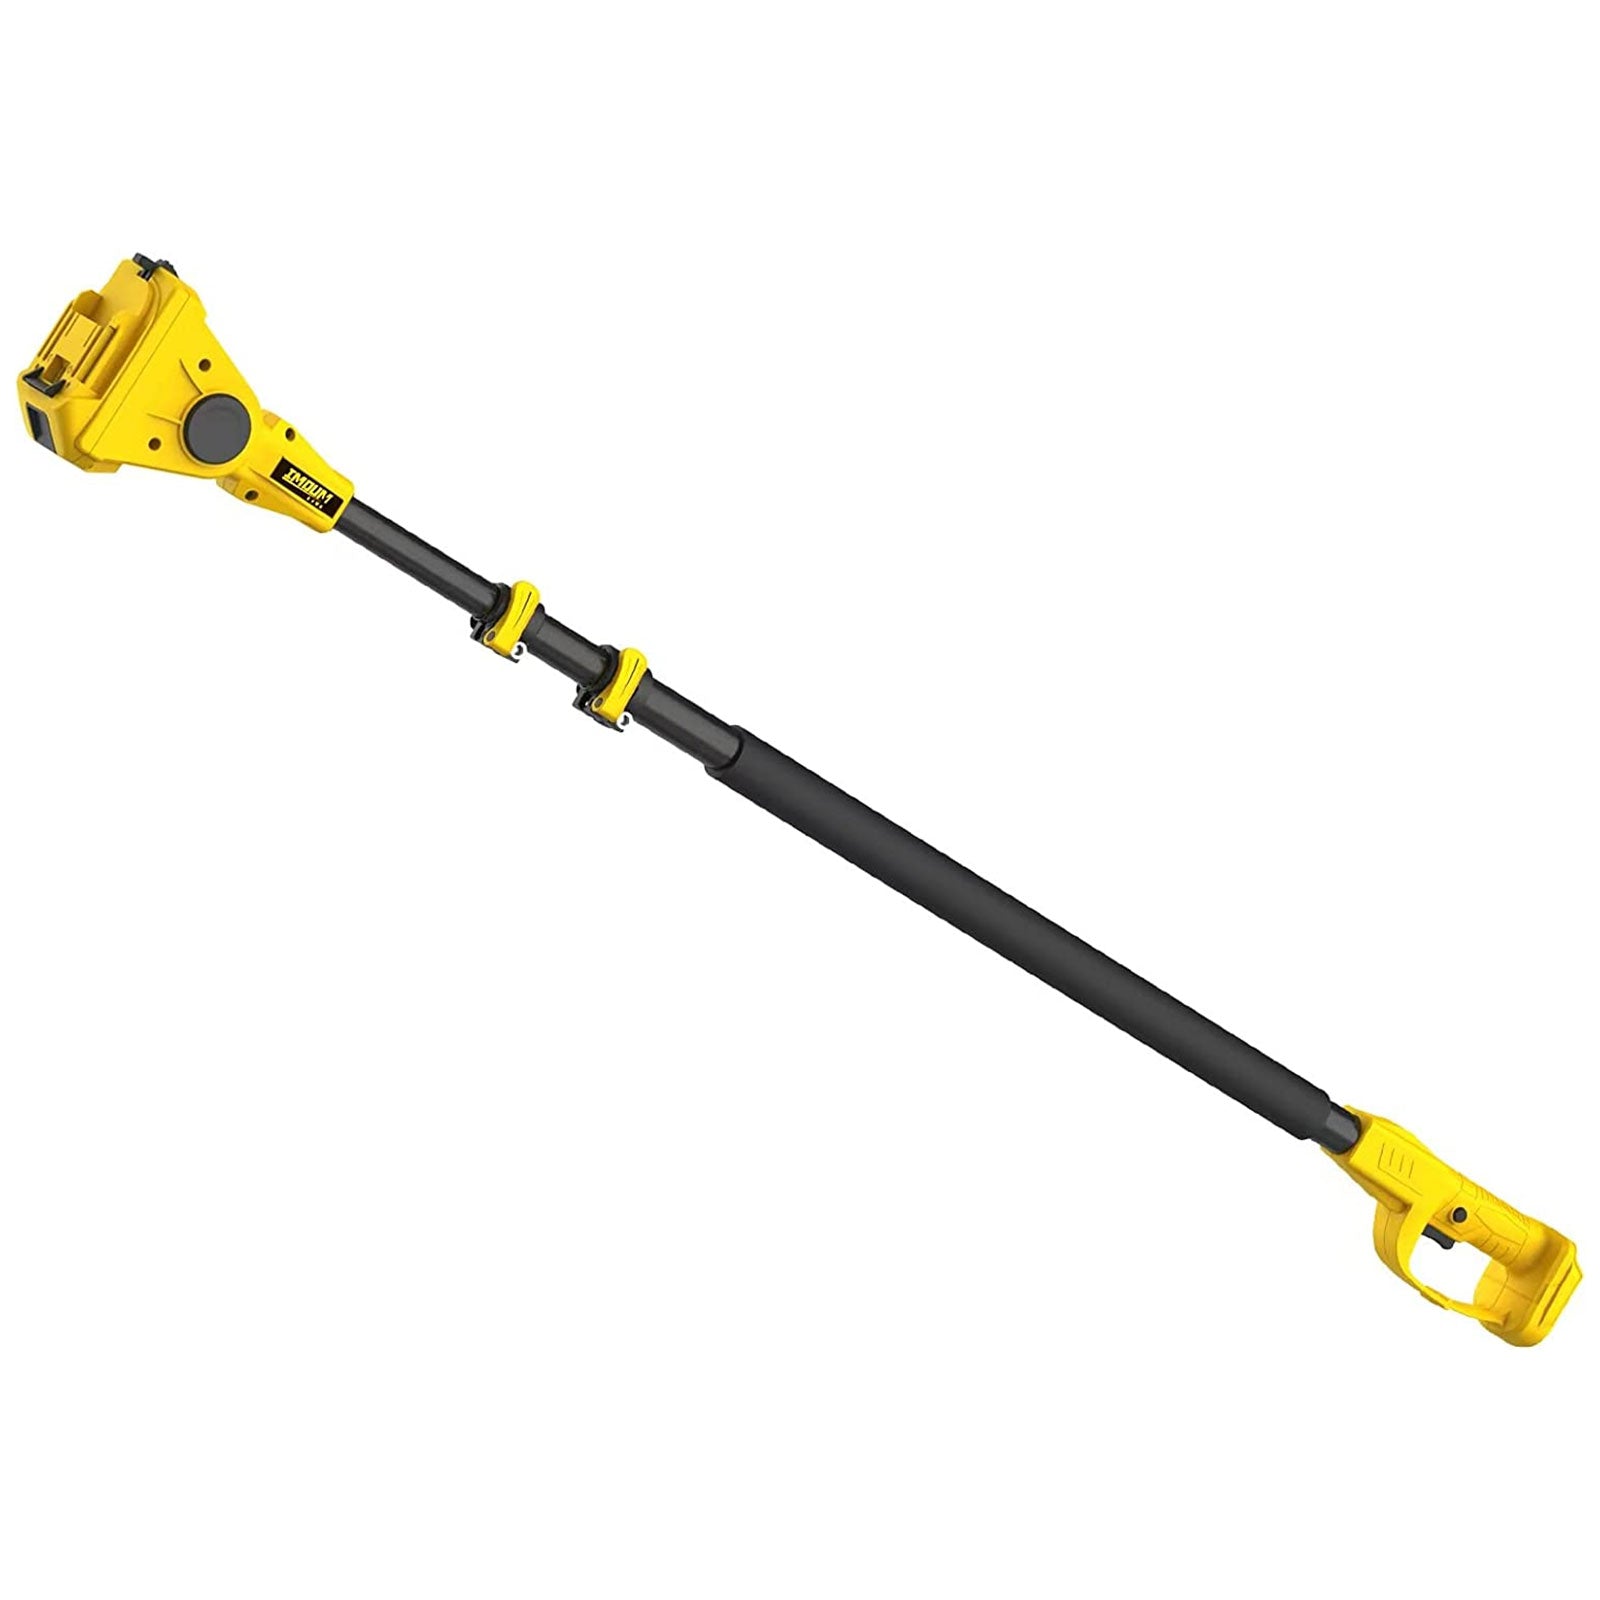 Imoumlive Extension Pole for Mini Chainsaws/Electric Pruner - Imoum